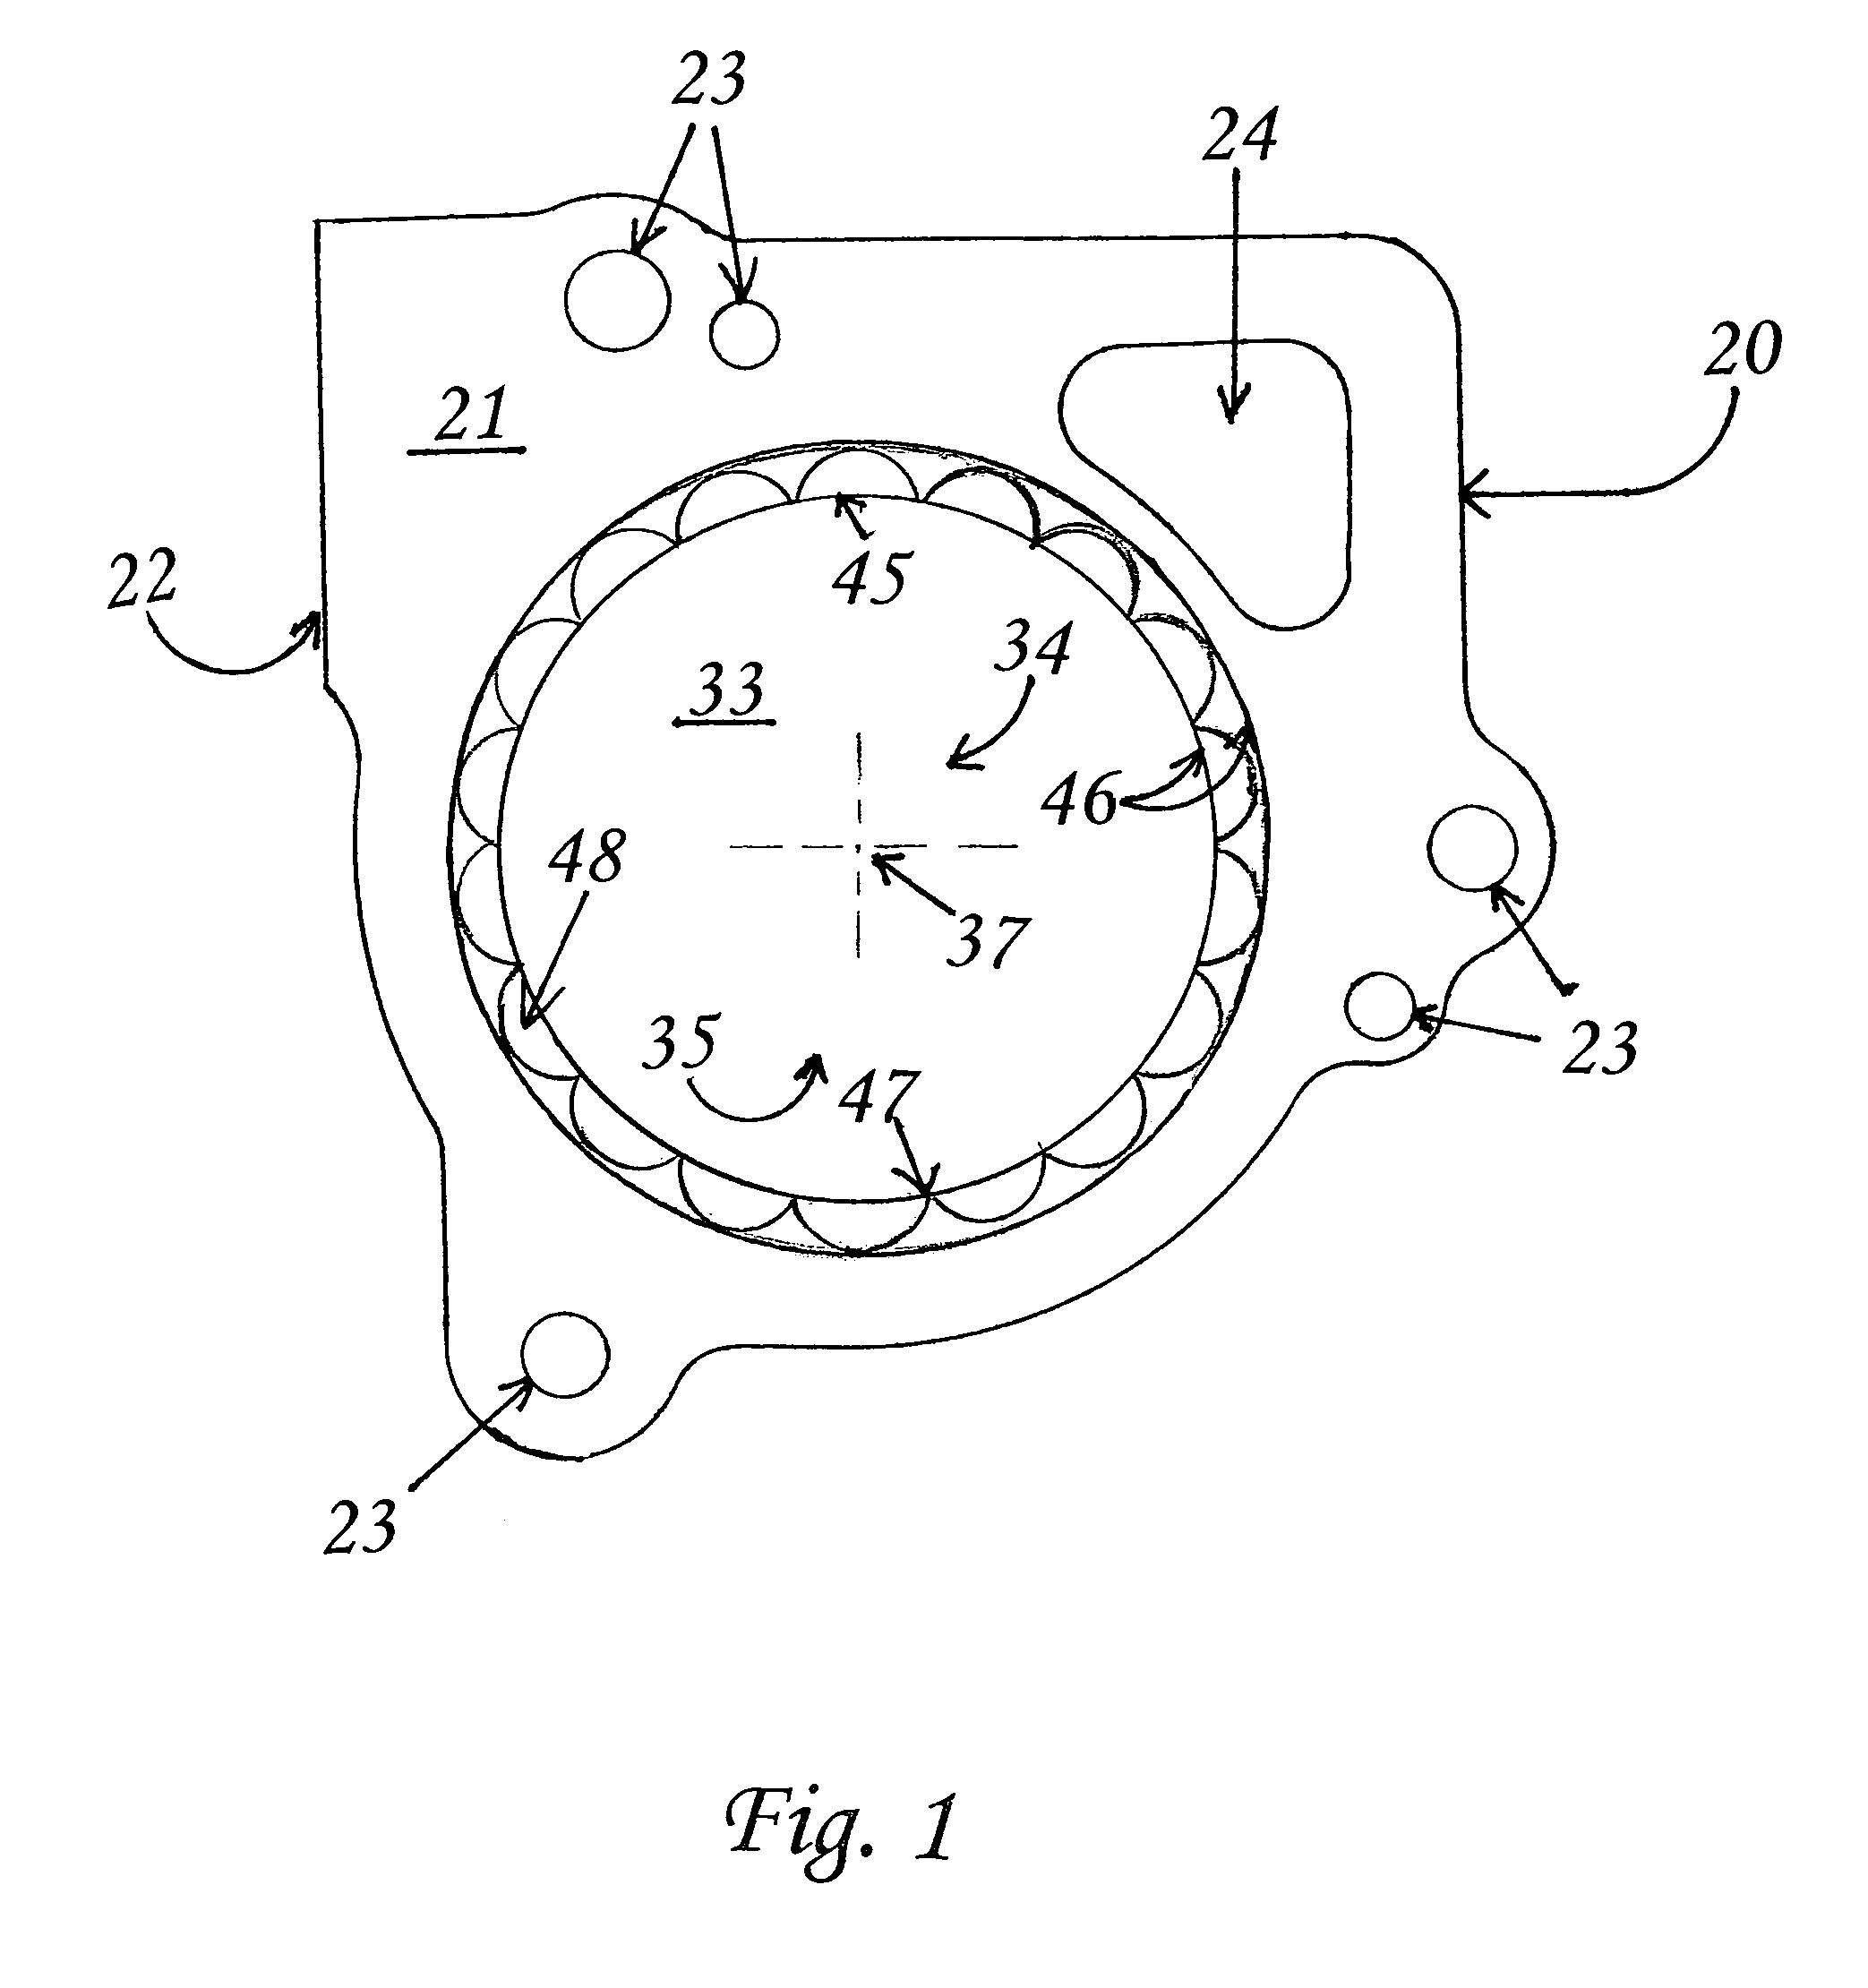 Spacer plate for use with internal combustion engines